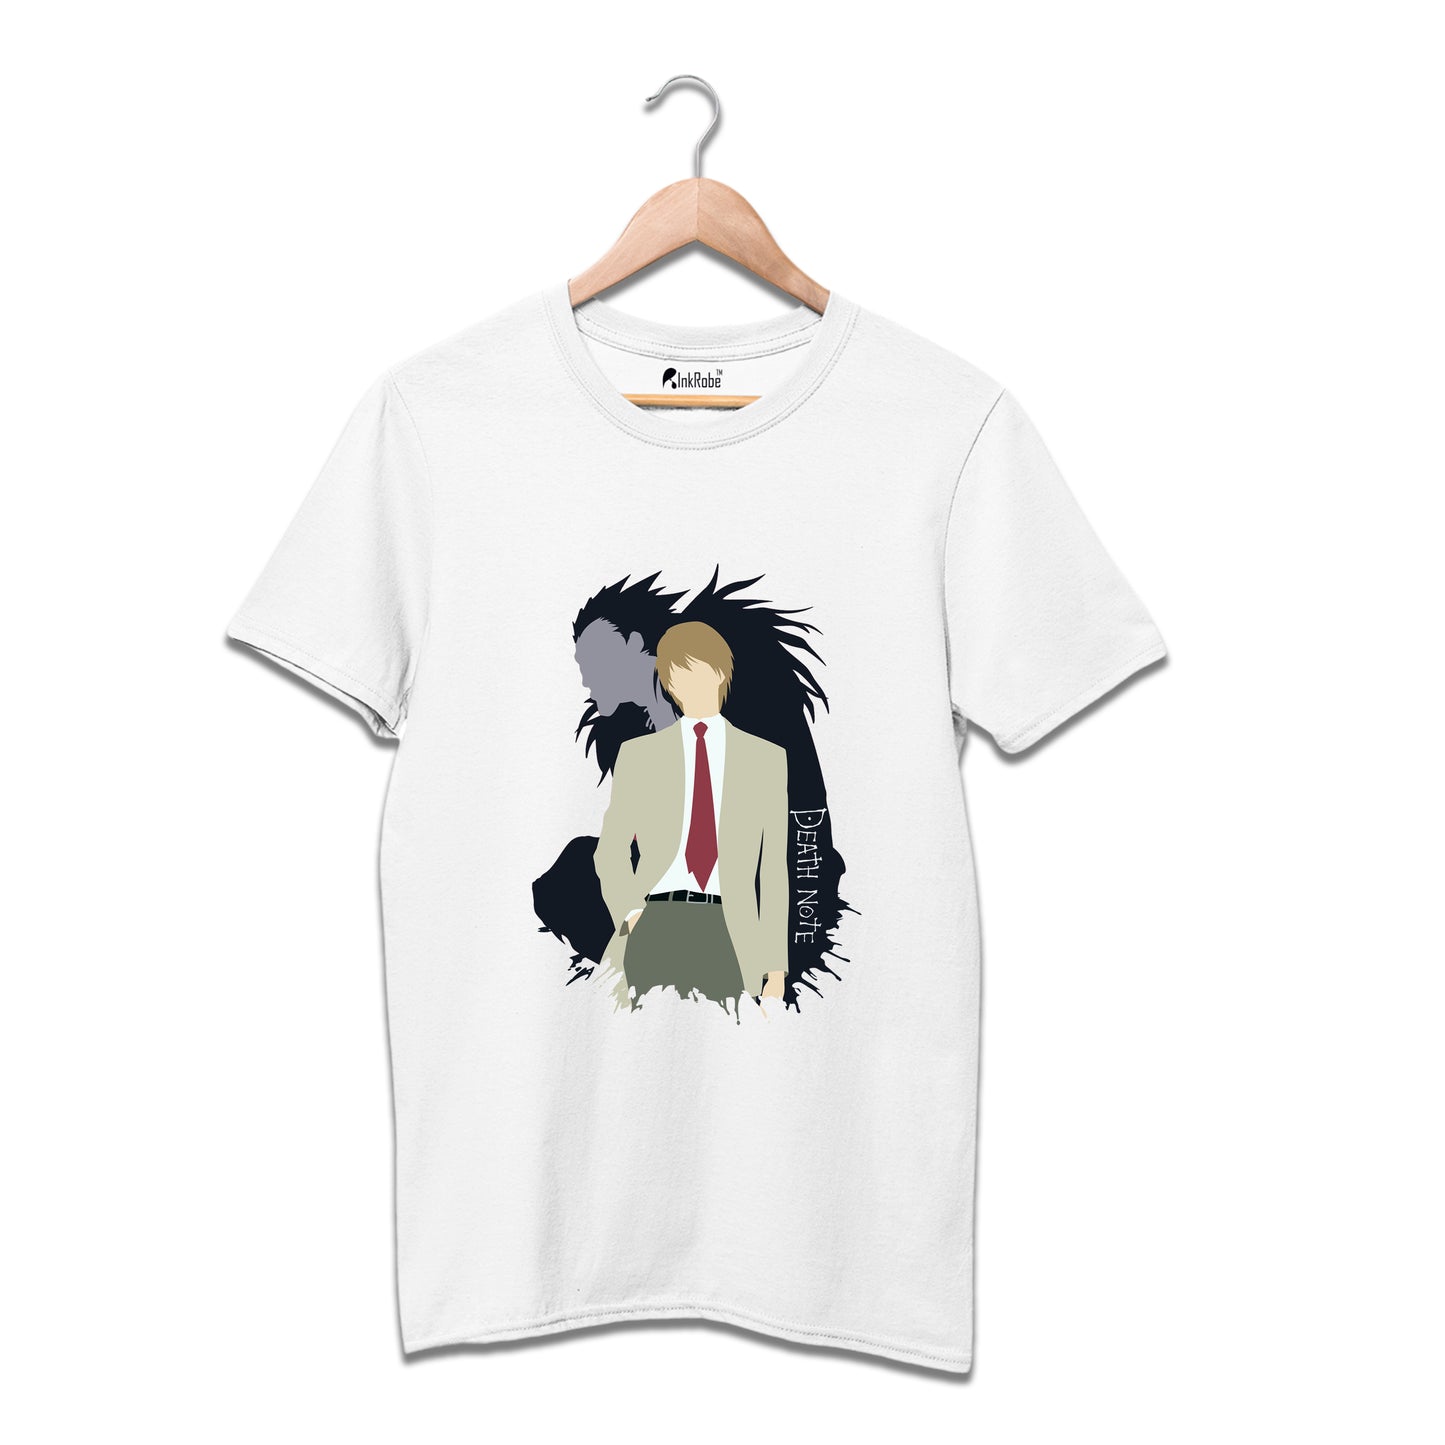 Death Note - Anime T-Shirt